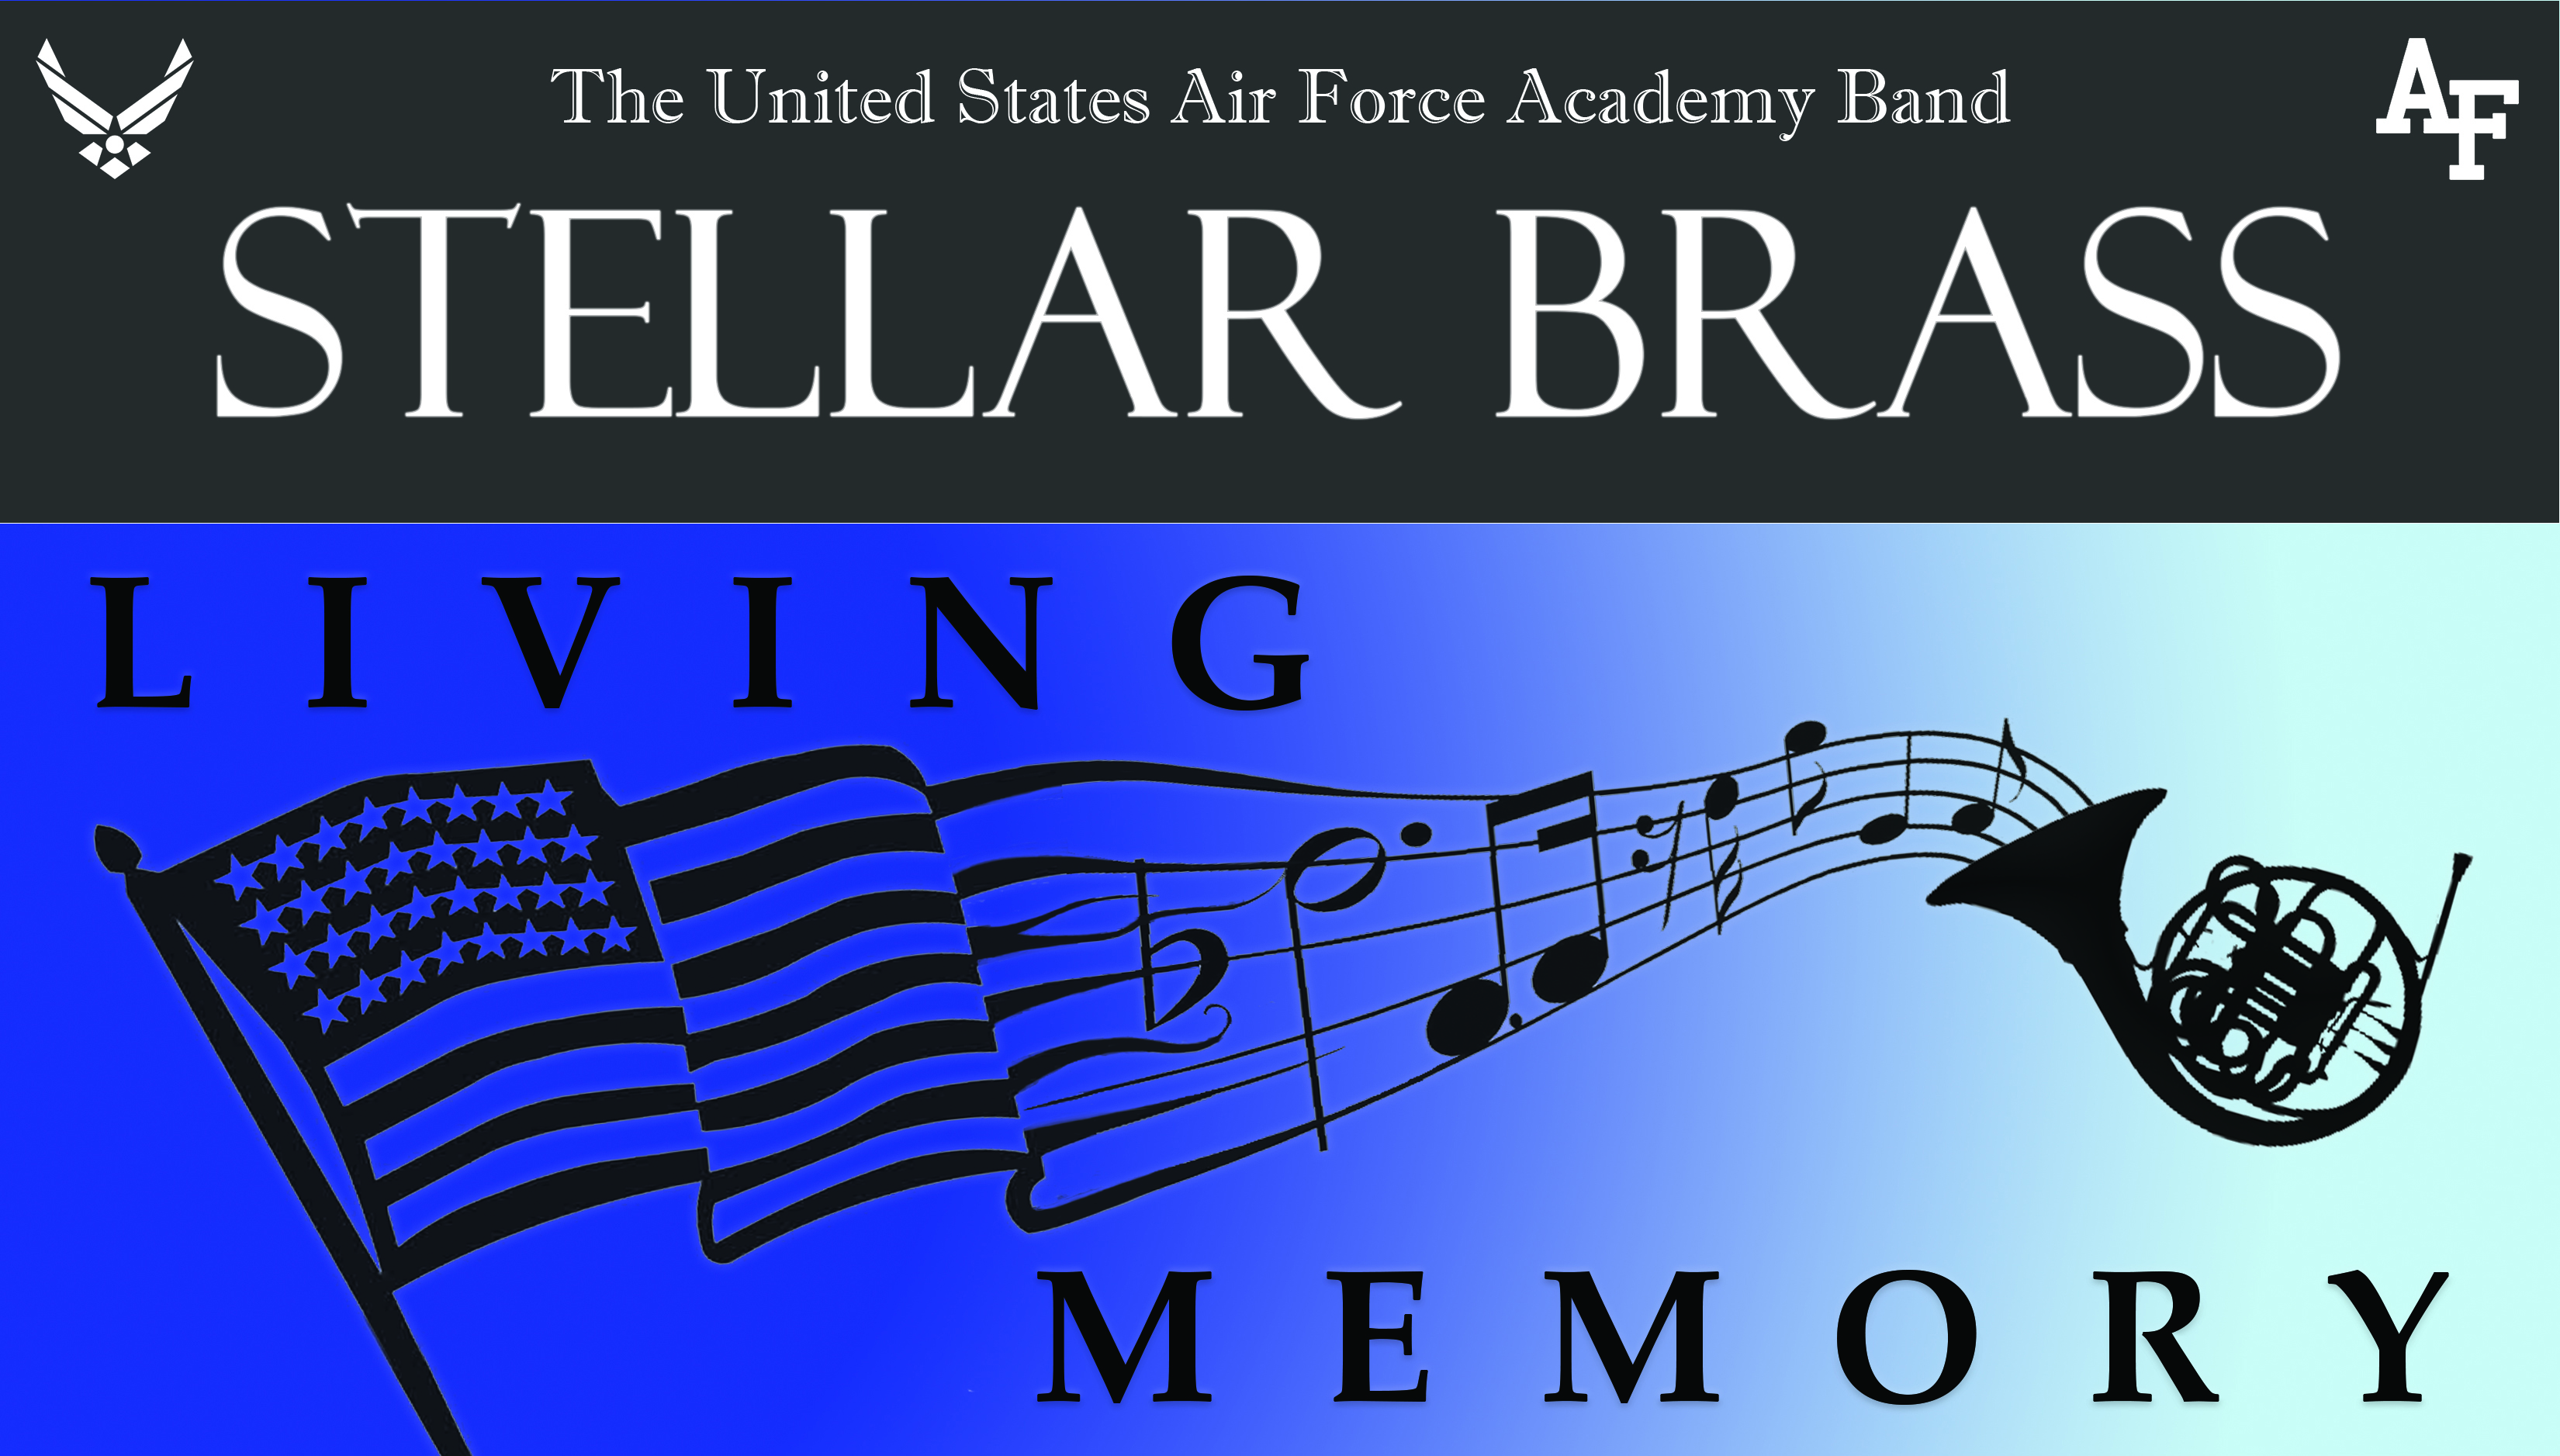 poster of flag with music notes about the Air Force Academy Band Stellar Brass